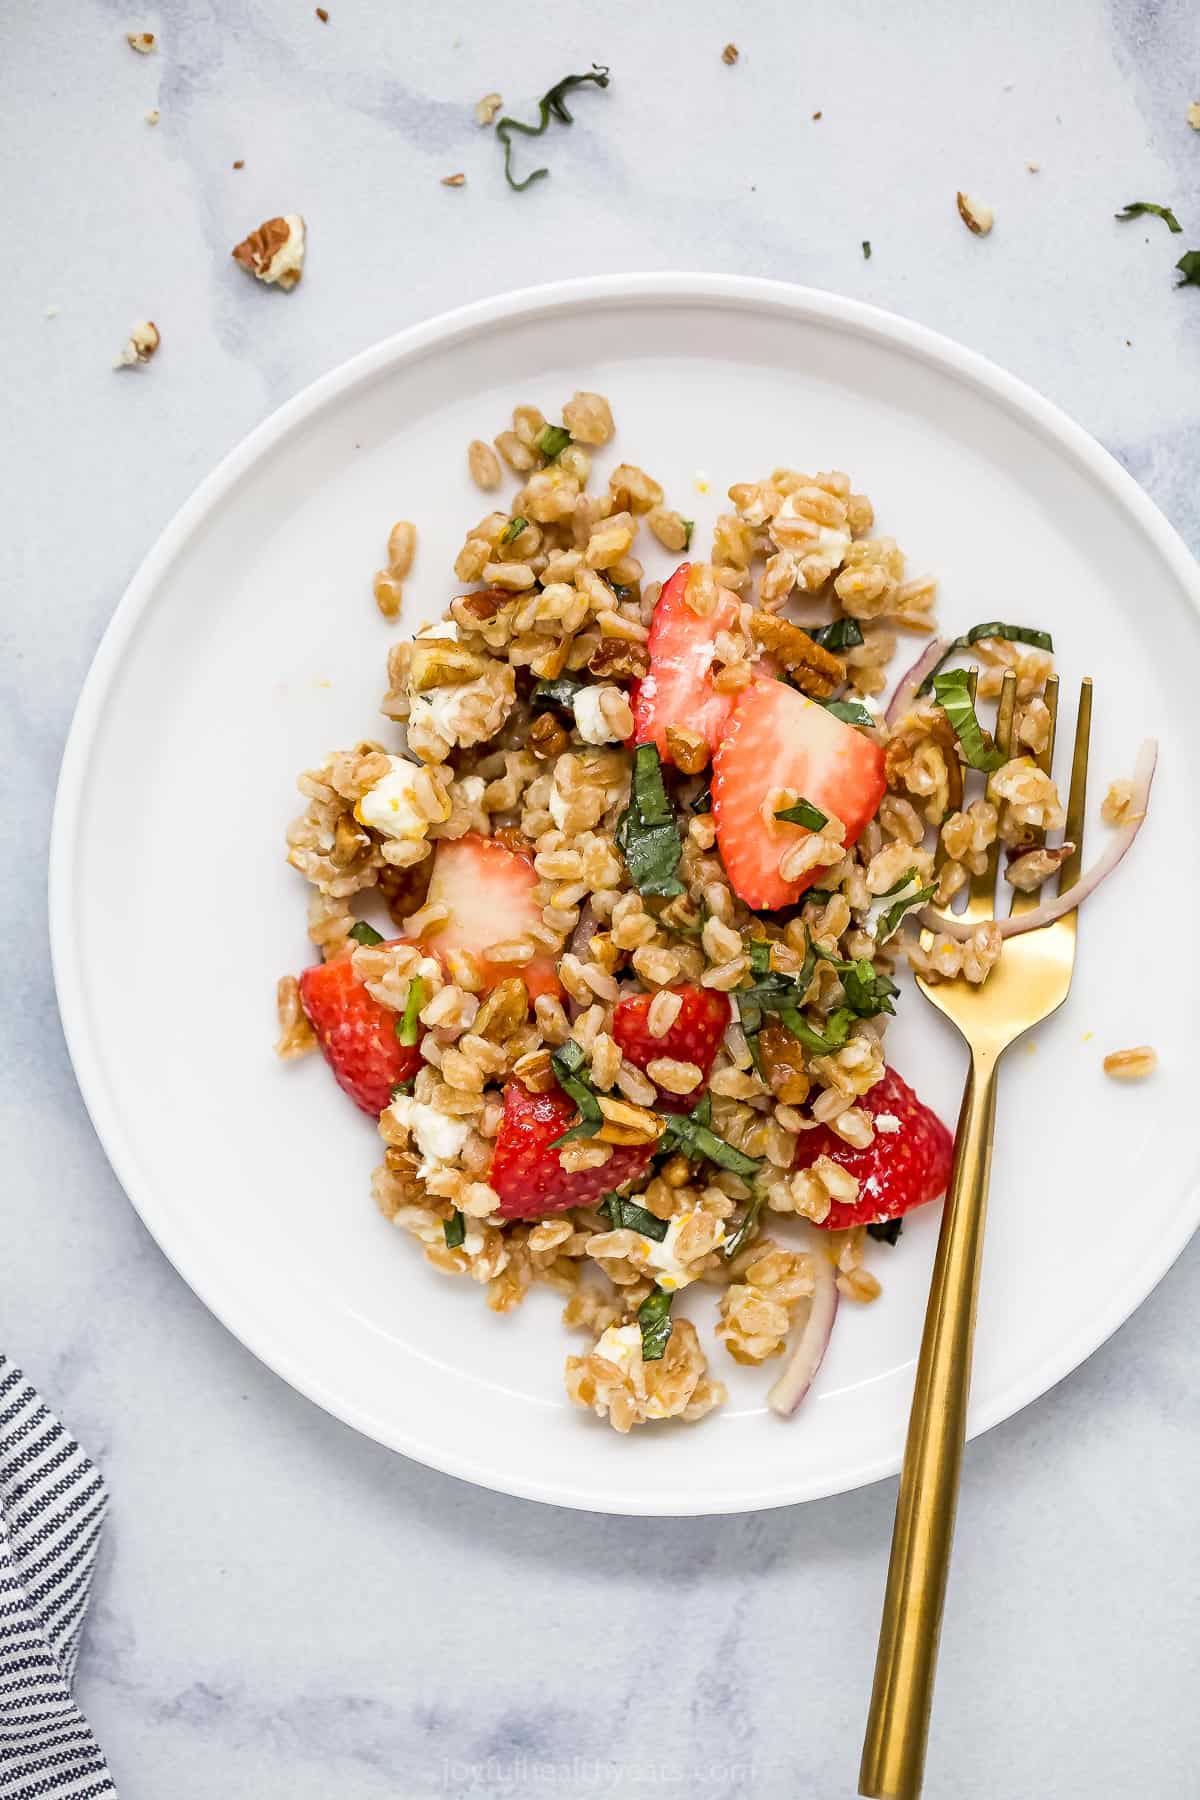 A serving of strawberry farro salad on a plate with a golden fork